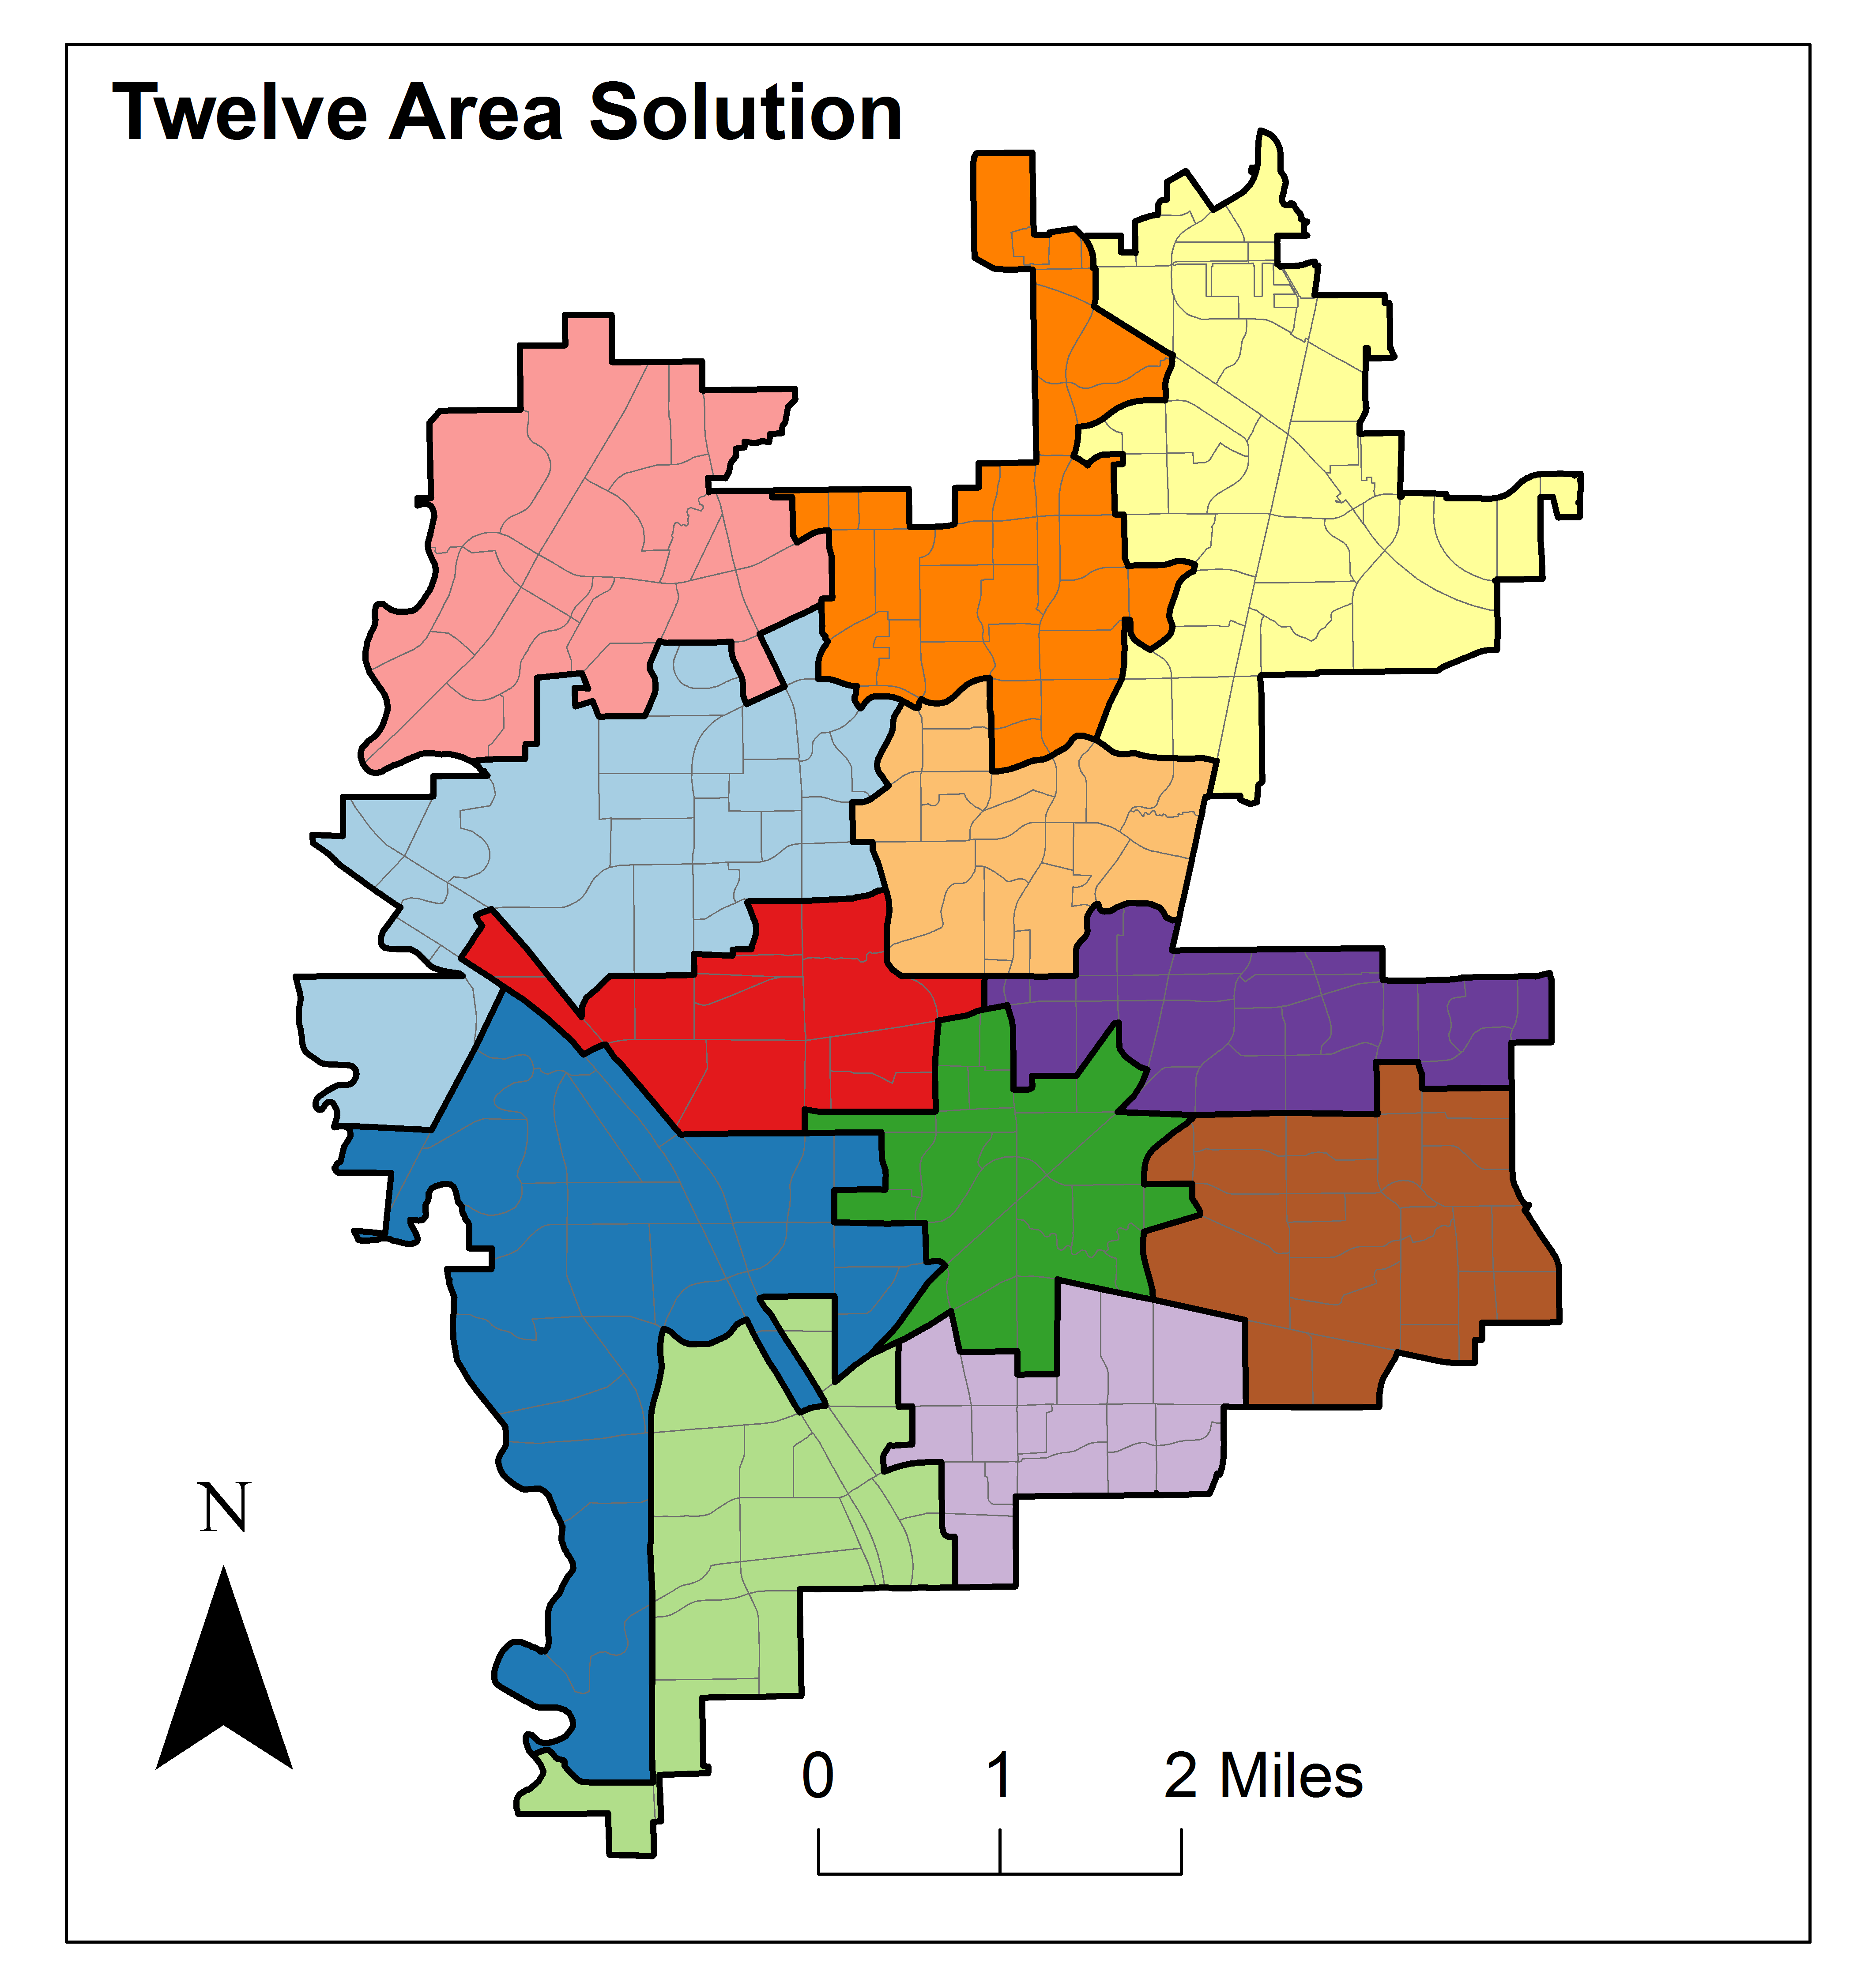 Redistricting reduced response times